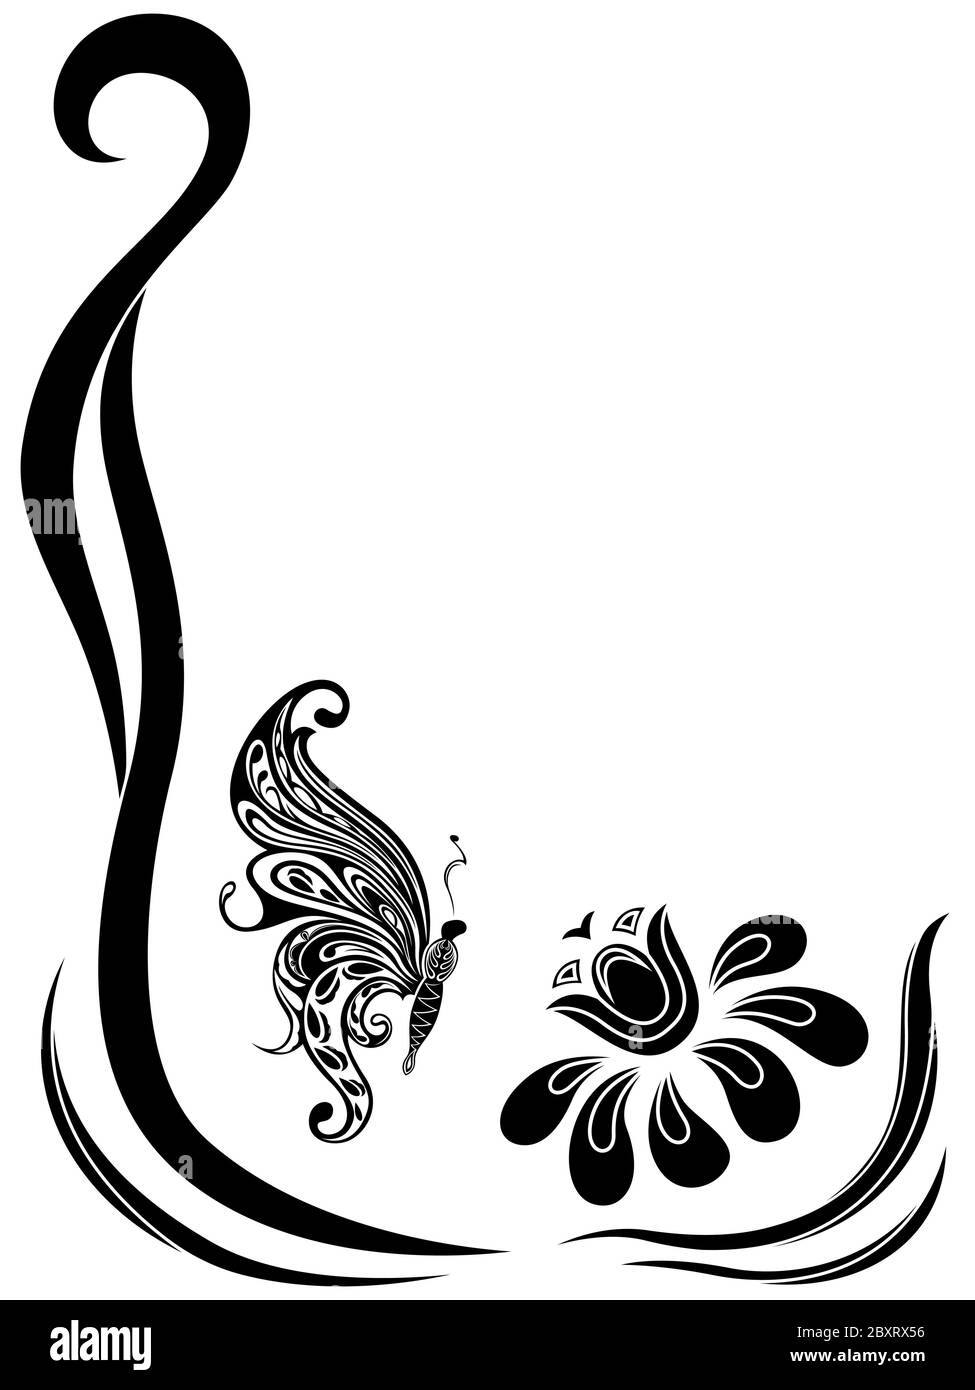 Black silhouette plant frame with butterfly and flower isolated on white background with place for your text Stock Vector